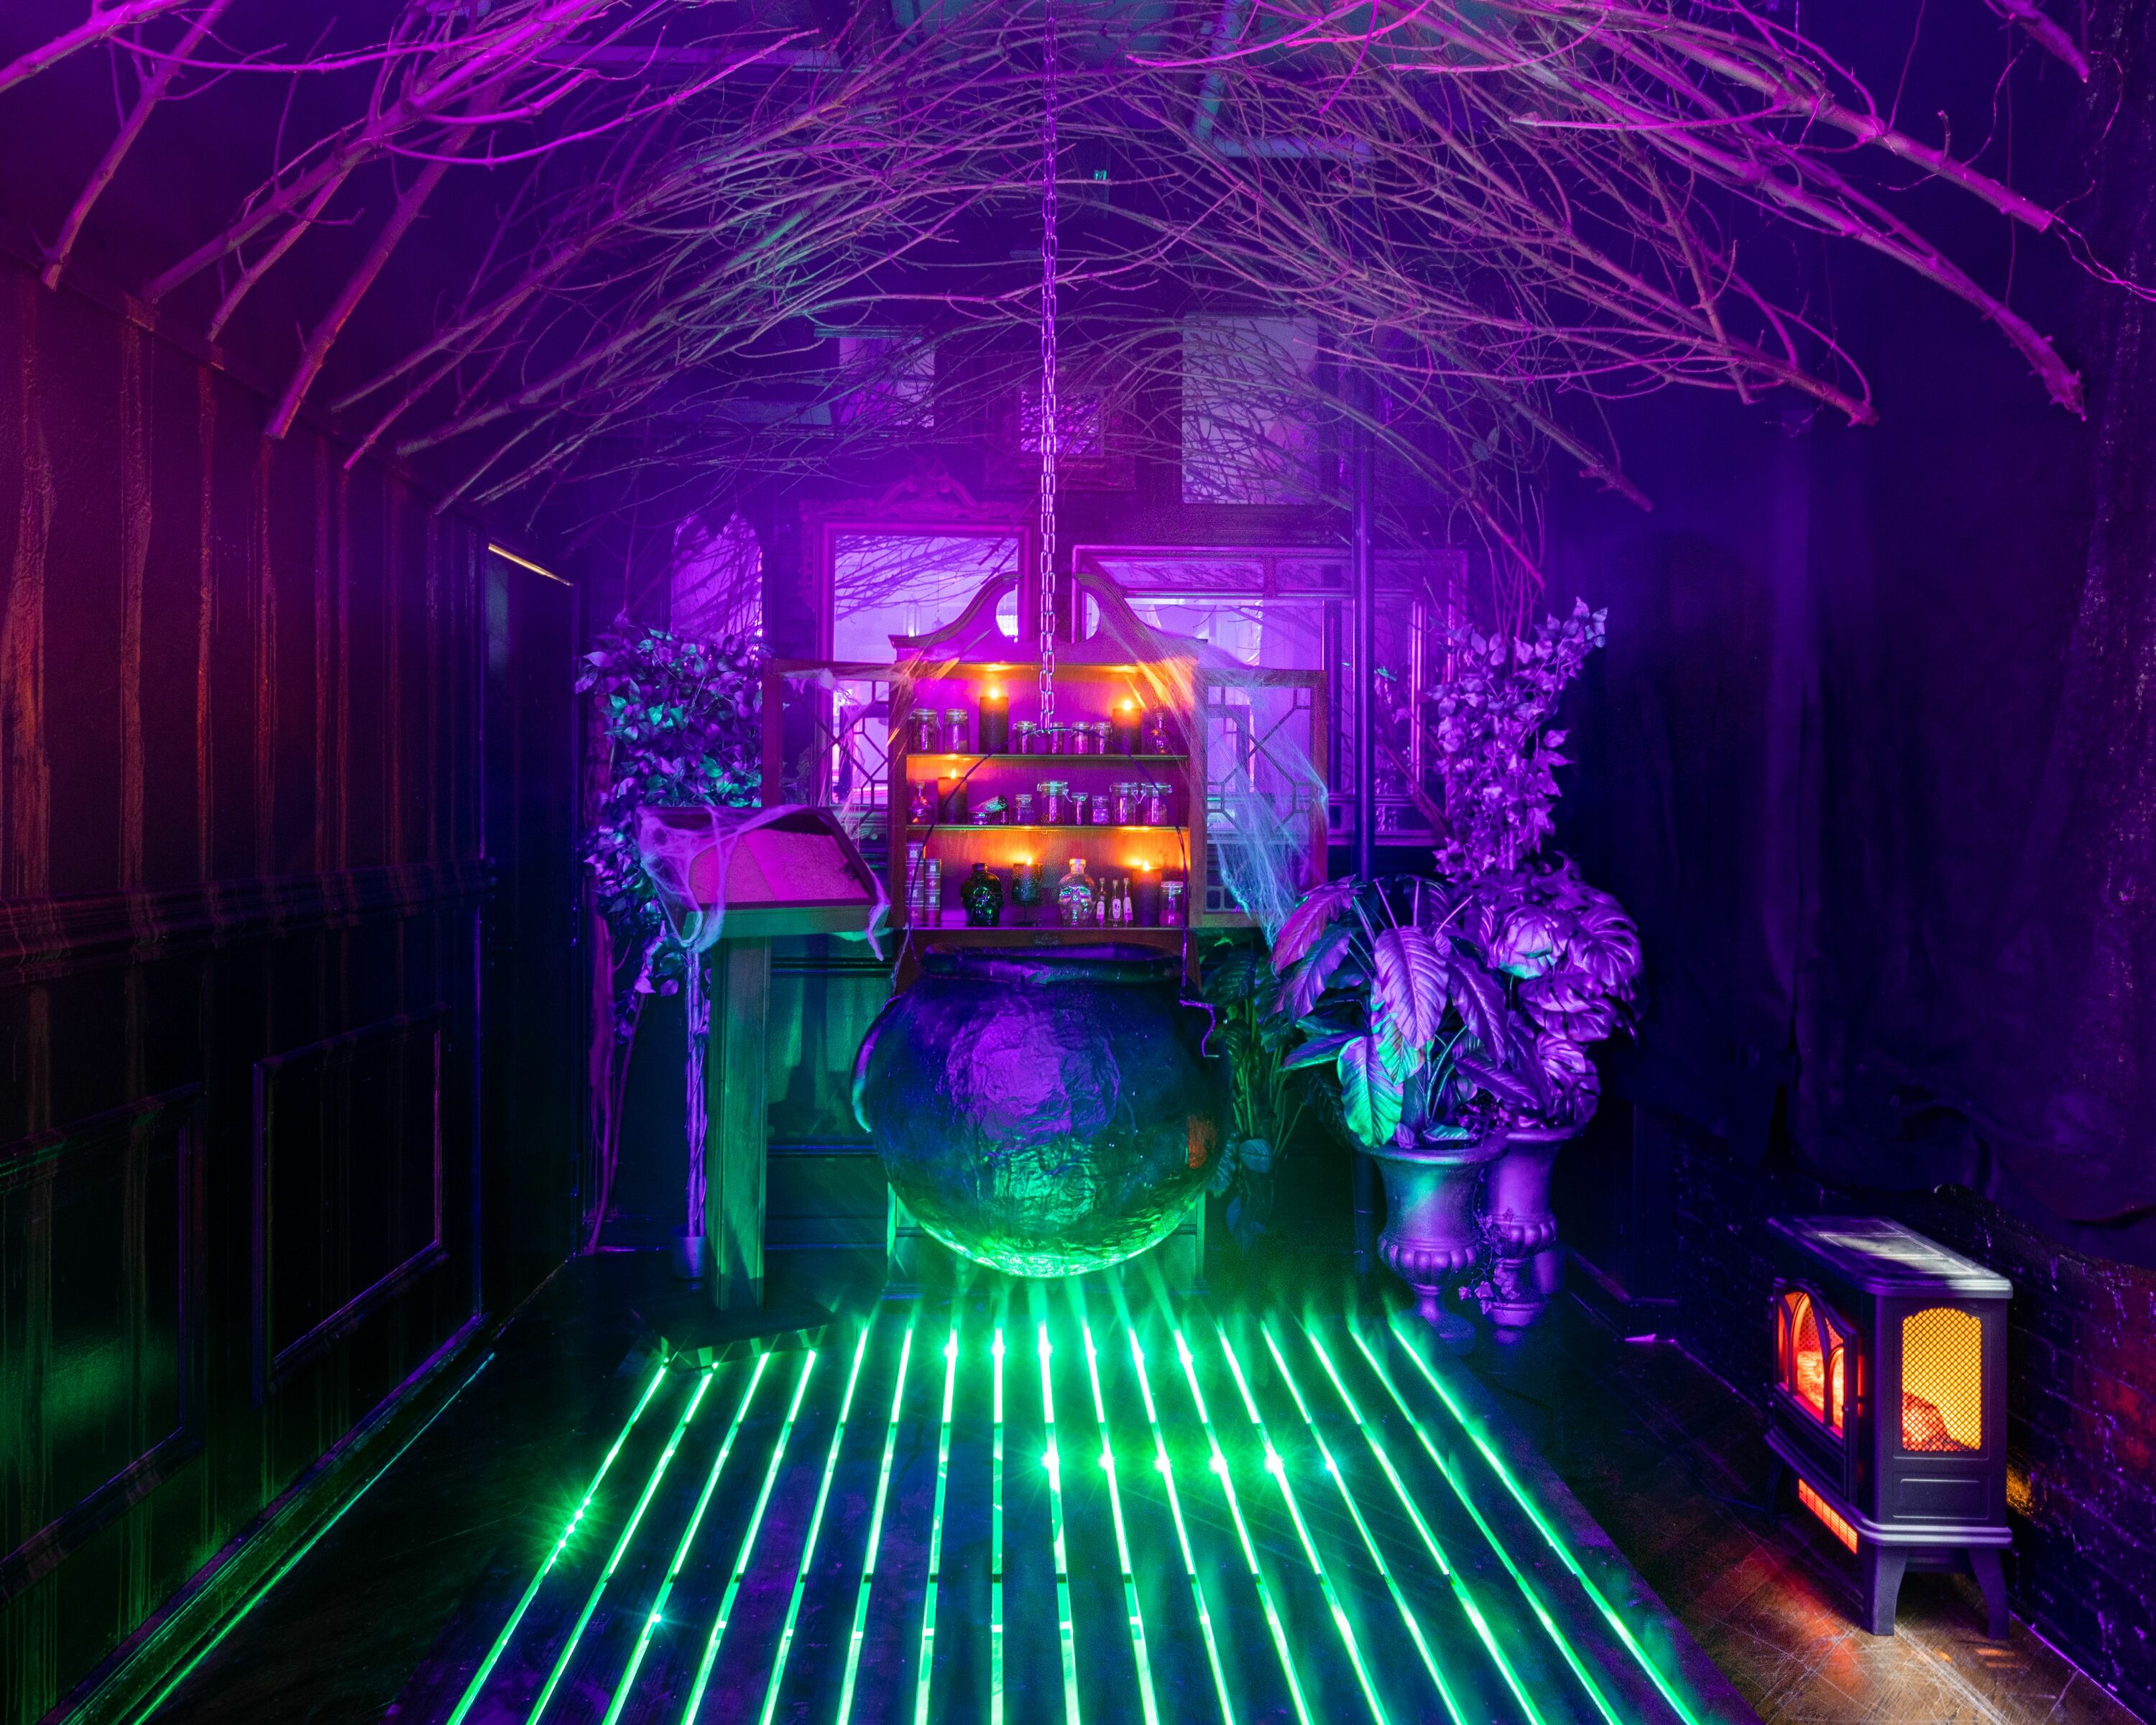 A room lit up with purple and green lights featuring a large cauldron, fireplace and Halloween-themed decor